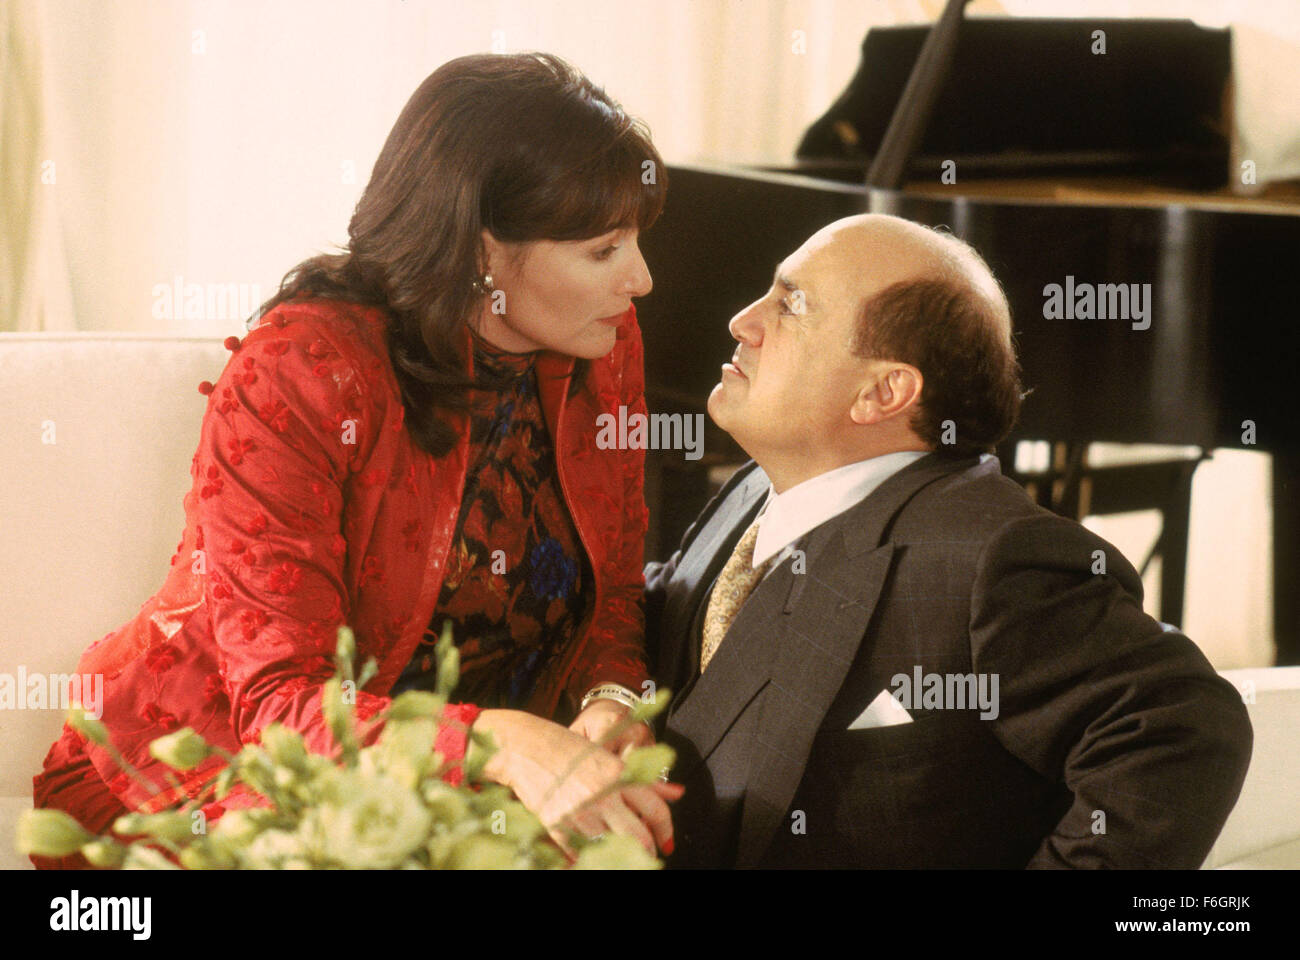 Jun 01, 2001; Boston , MA, USA; Actors NORA DUNN as Lutetia Fairbanks and DANNY DEVITO as Max Fairbanks star in 'What's The Worst That Could Happen?' Stock Photo